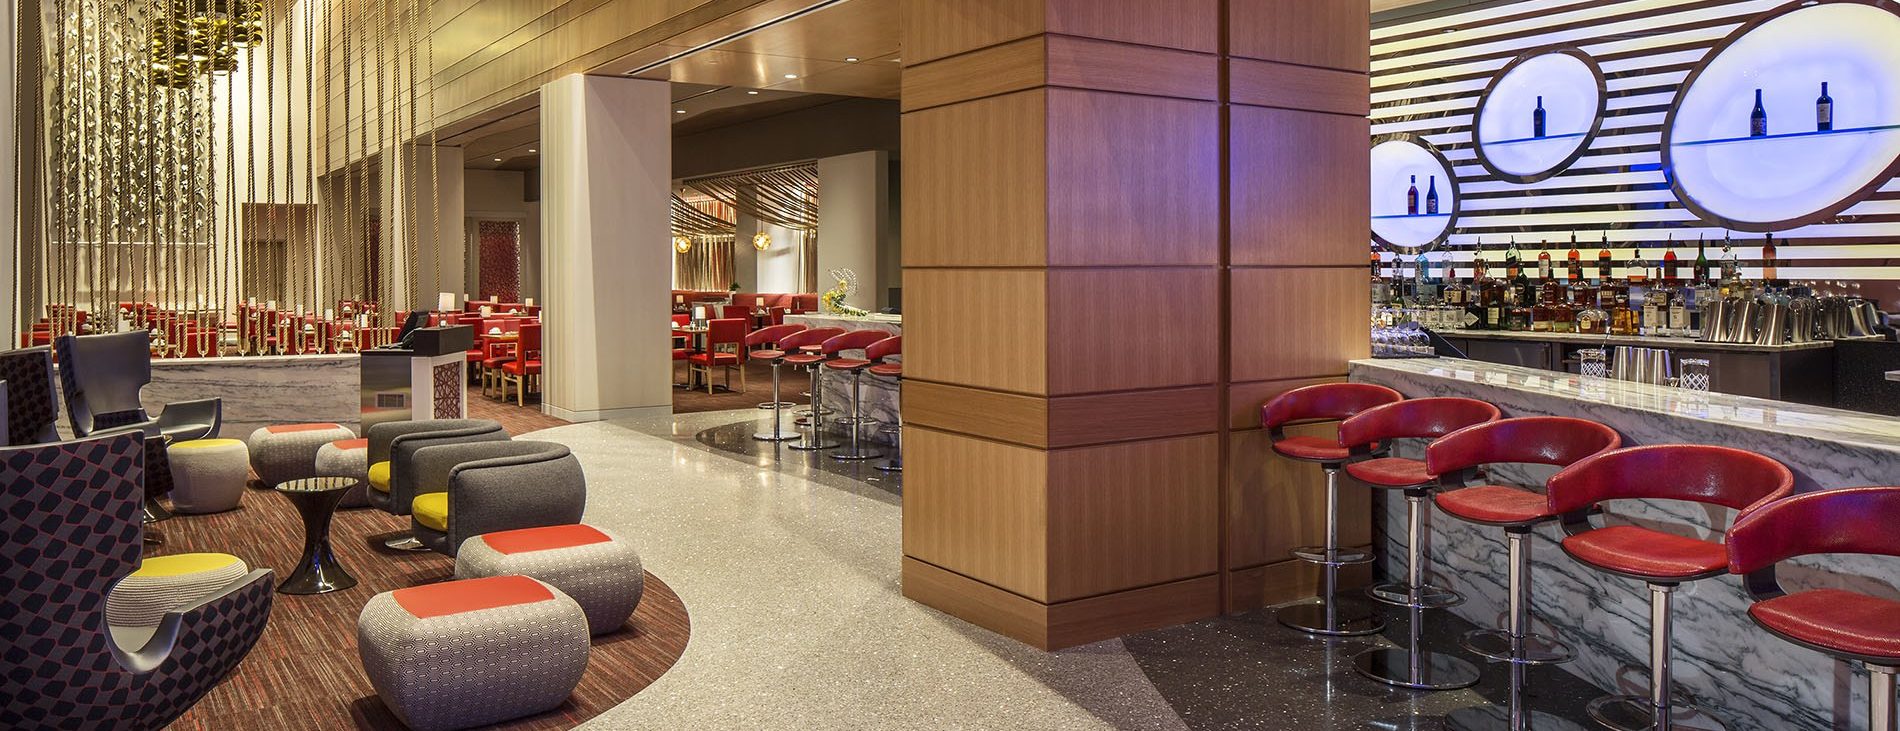 Glenn Rieder supplied all of the architectural millwork for Potawatomi Hotel.